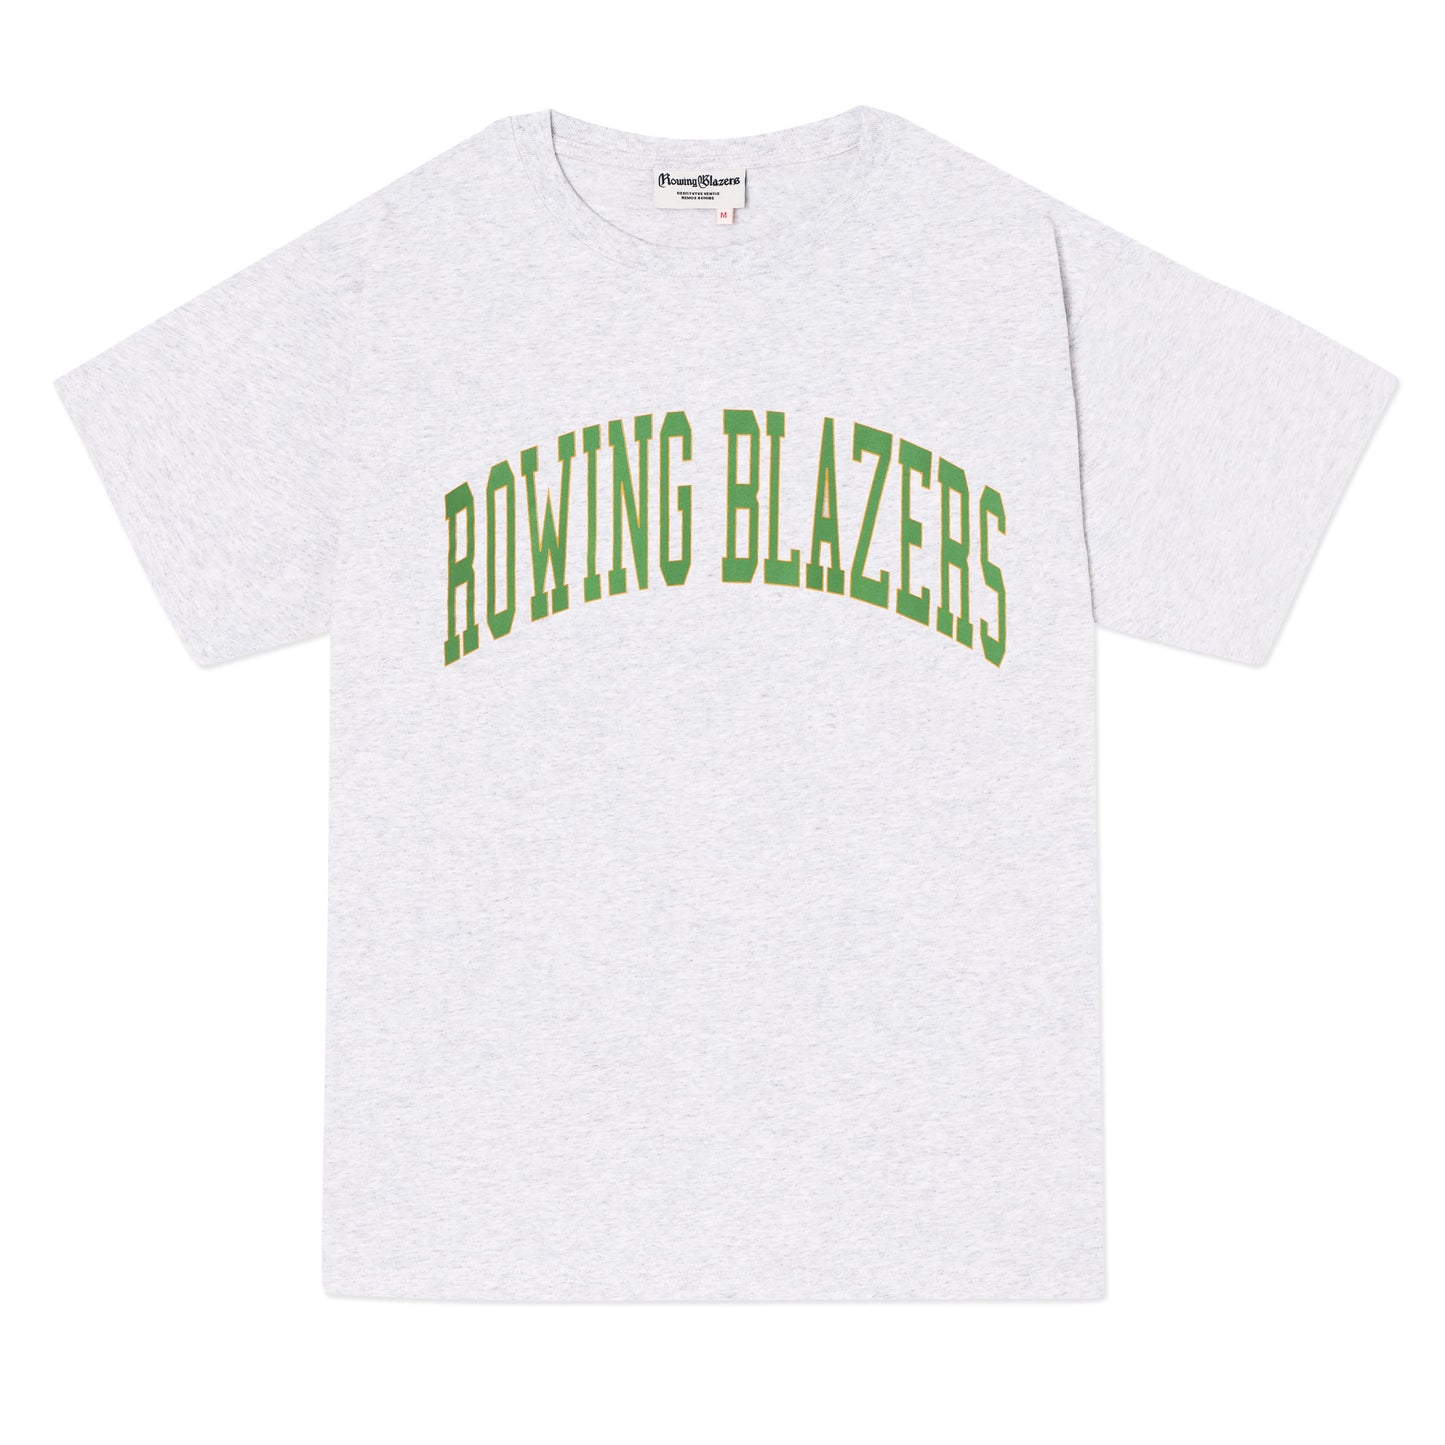 Classic light heather gray collegiate tee with "Rowing Blazers" across the front in green.